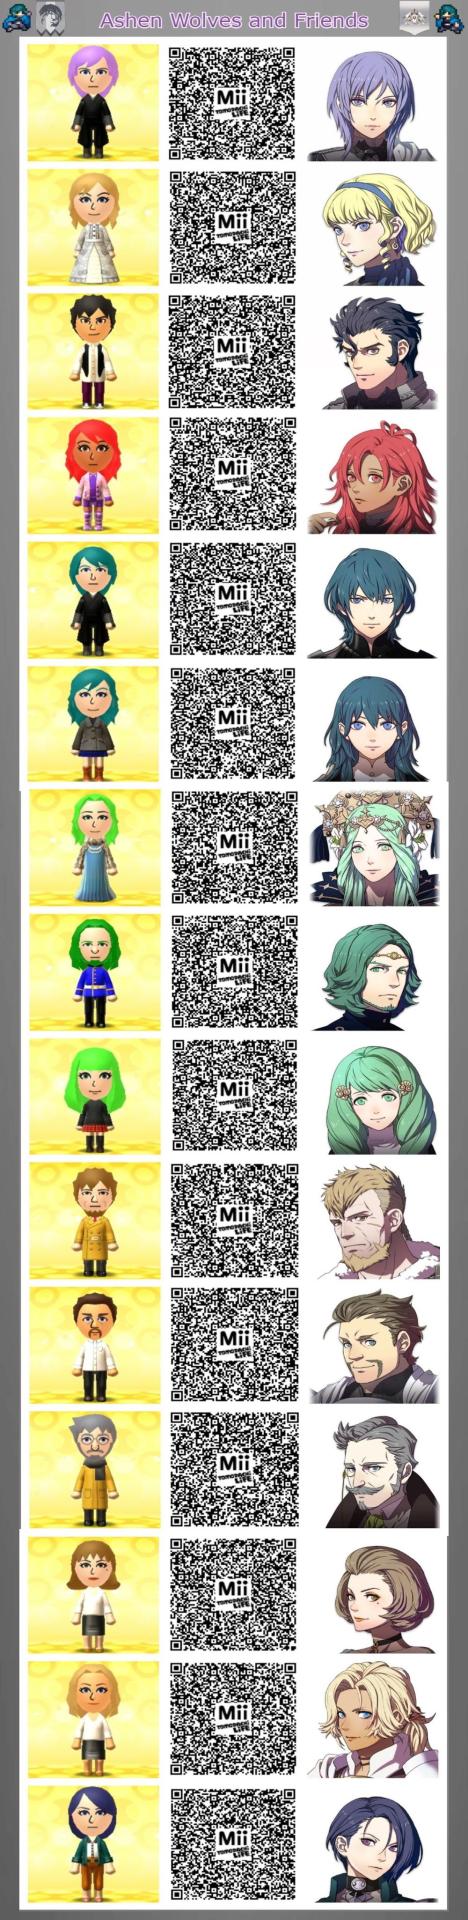 In anticipation for the release of Fire Emblem: Three Hopes and to wrap up my collection of Three Houses Miis, here are the Ashen Wolves and staff of Garreg Mach Monastery! I hope you all enjoy! 😊Most of these were difficult to make given the lack of unique customizations of the 3DS, but at least this is mitigated with the Switch version of Miitopia. With that being said...Tomodachi Life on Switch when, Nintendo? #fire emblem #fire emblem three houses #fe3h#tomodachi life#miitopia #fire emblem three hopes #ashen wolves #fire emblem yuri #yuri leclerc #constance von nuvelle  #fire emblem constance  #fire emblem hapi  #balthus von albrecht  #balthus fire emblem #female byleth#male byleth #fire emblem byleth  #rhea fire emblem #seteth fe3h #flayn fire emblem #jeralt eisner #manuela fire emblem #manuela casagranda #hanneman von essar  #hanneman fire emblem  #alois fire emblem  #catherine fire emblem  #shamir fire emblem #shamir nevrand